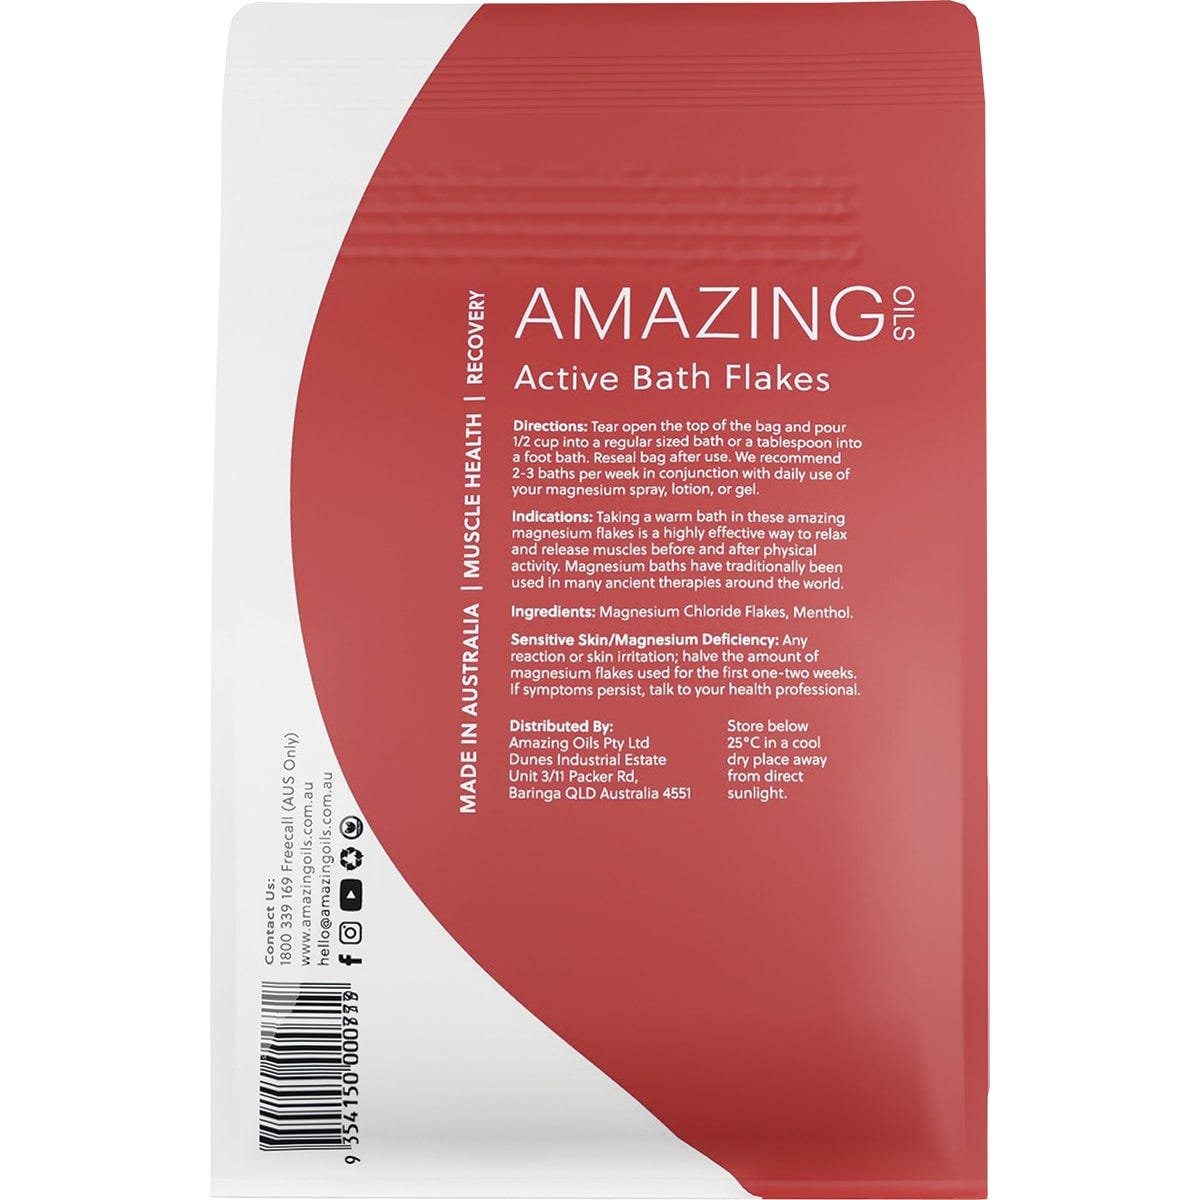 Amazing Oils Magnesium Active Bath Flakes Mag Chloride & Menthol 800g - Dr Earth - Bath & Body, Magnesium & Salts, Joint & Muscle Health